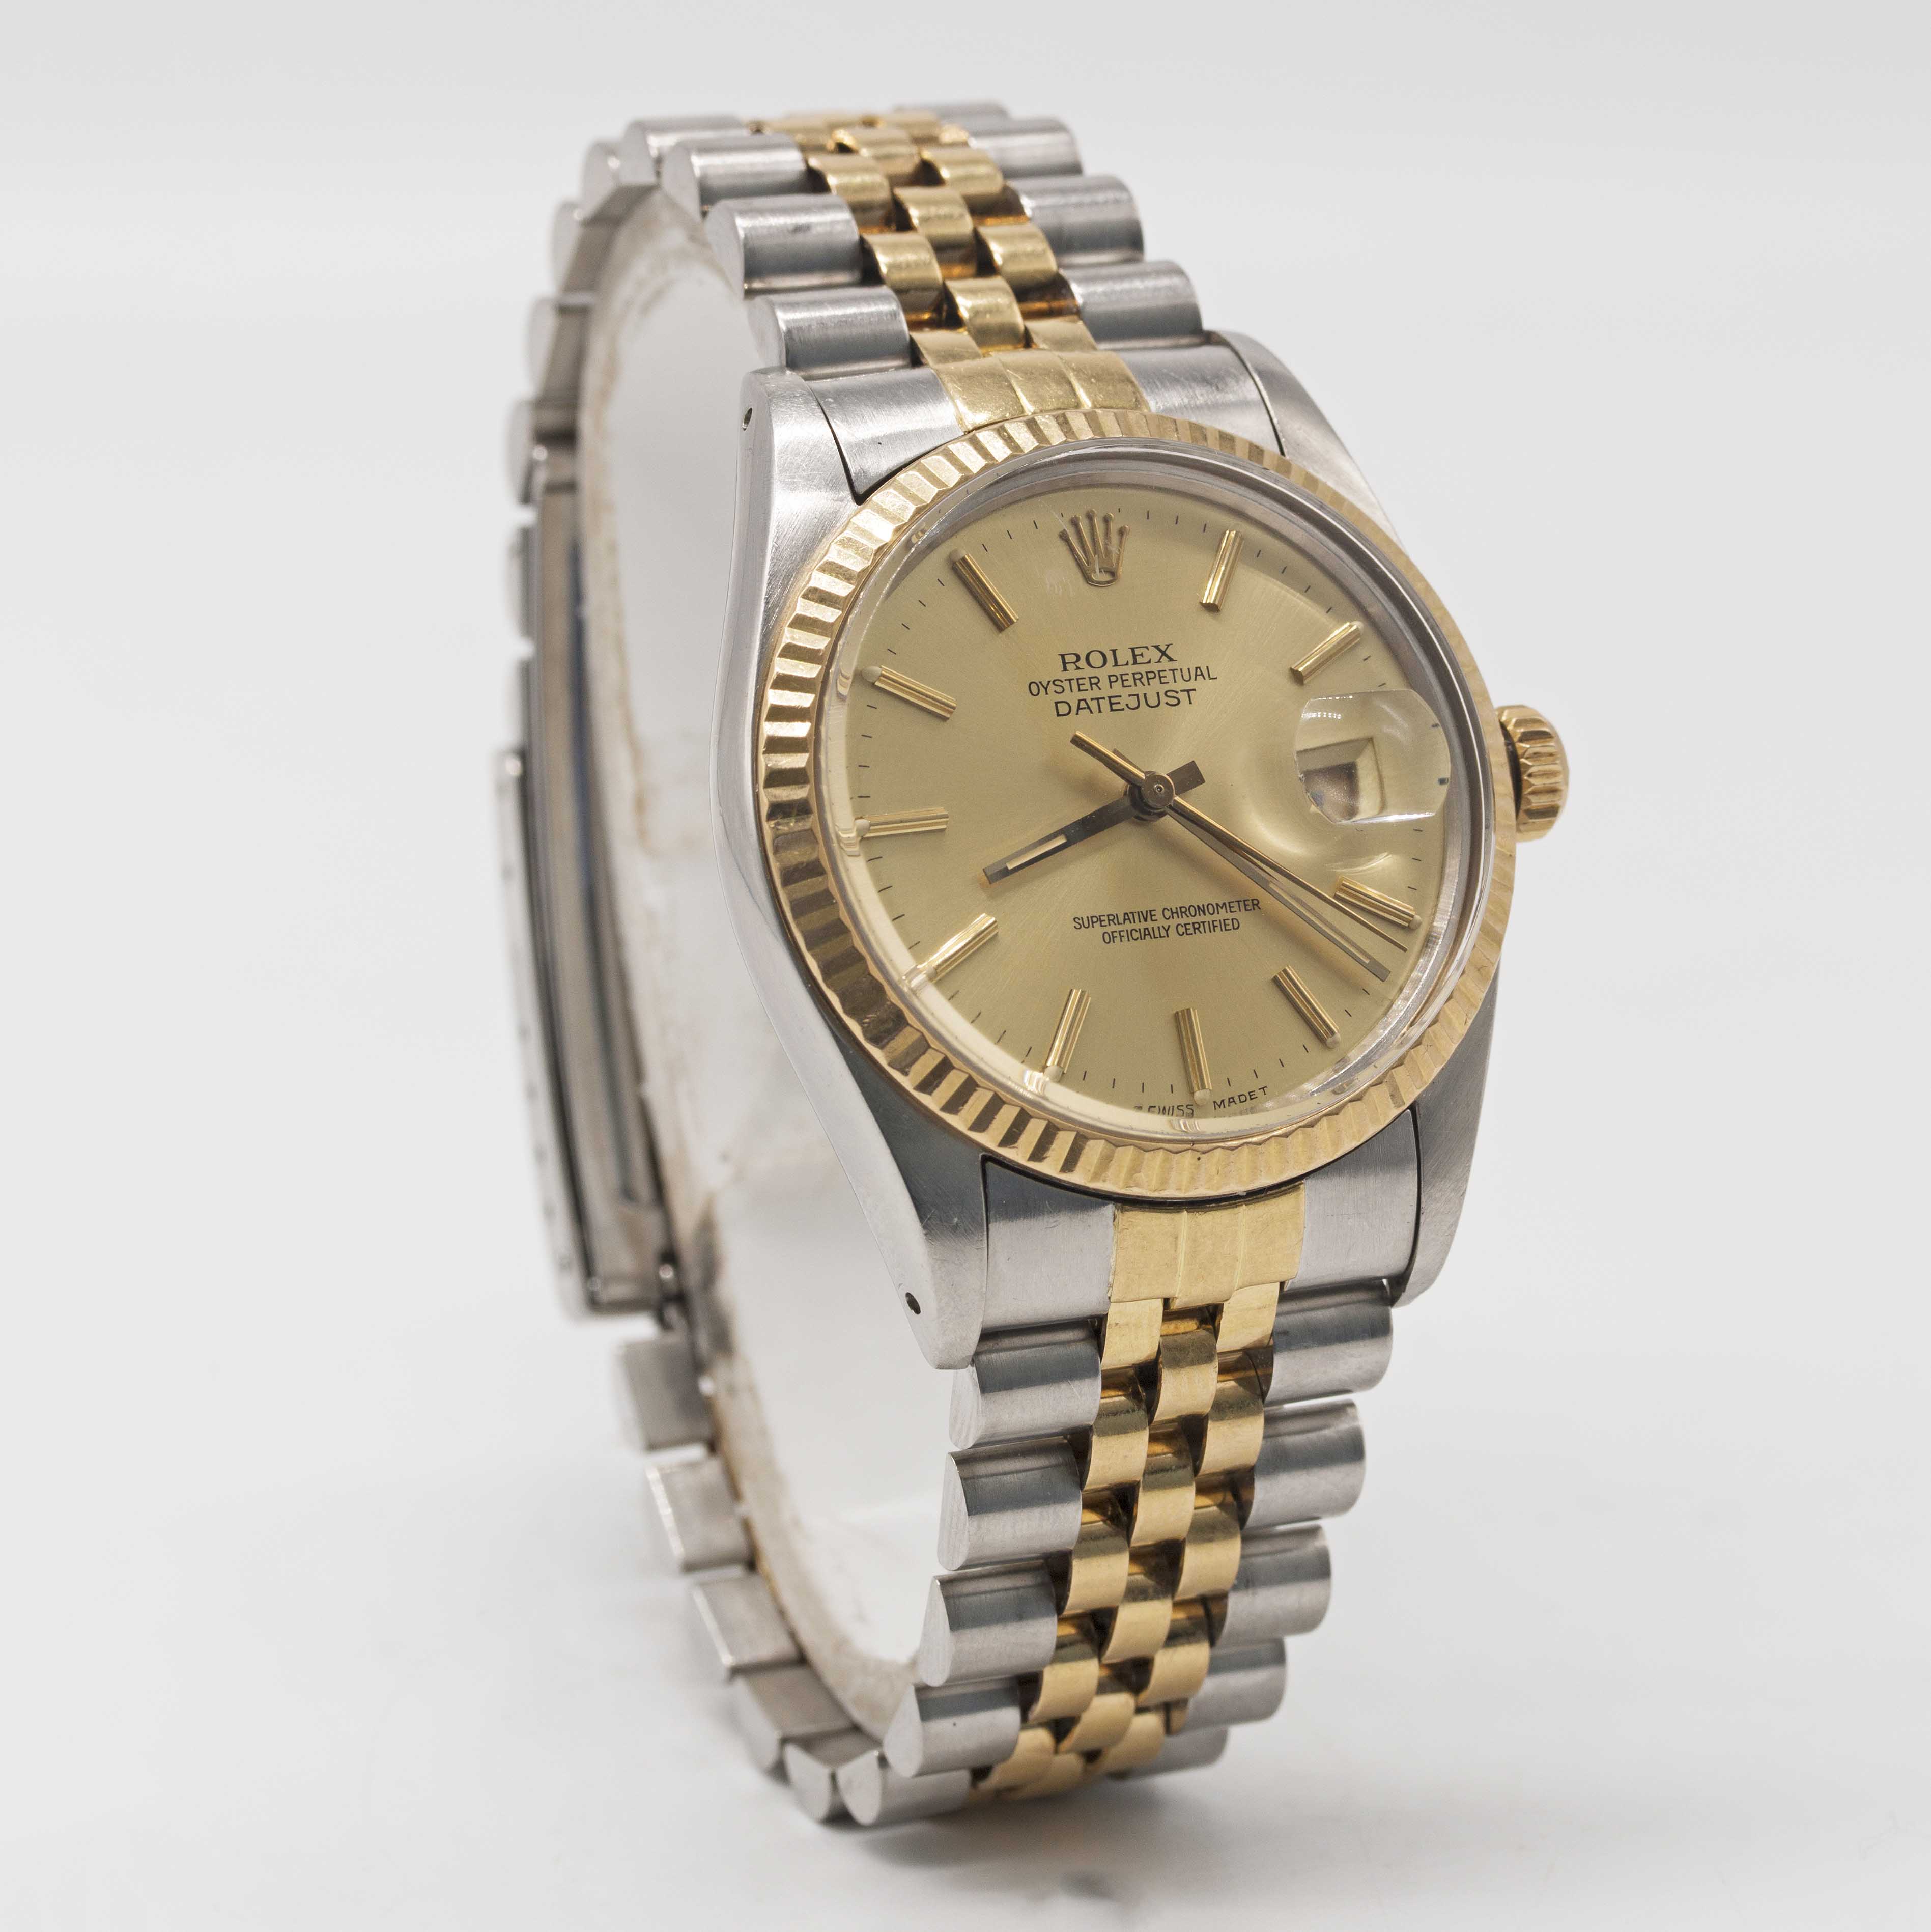 A GENTLEMAN'S STEEL & GOLD ROLEX OYSTER PERPETUAL DATEJUST BRACELET WATCH CIRCA 1985, REF. 16013 - Image 4 of 7